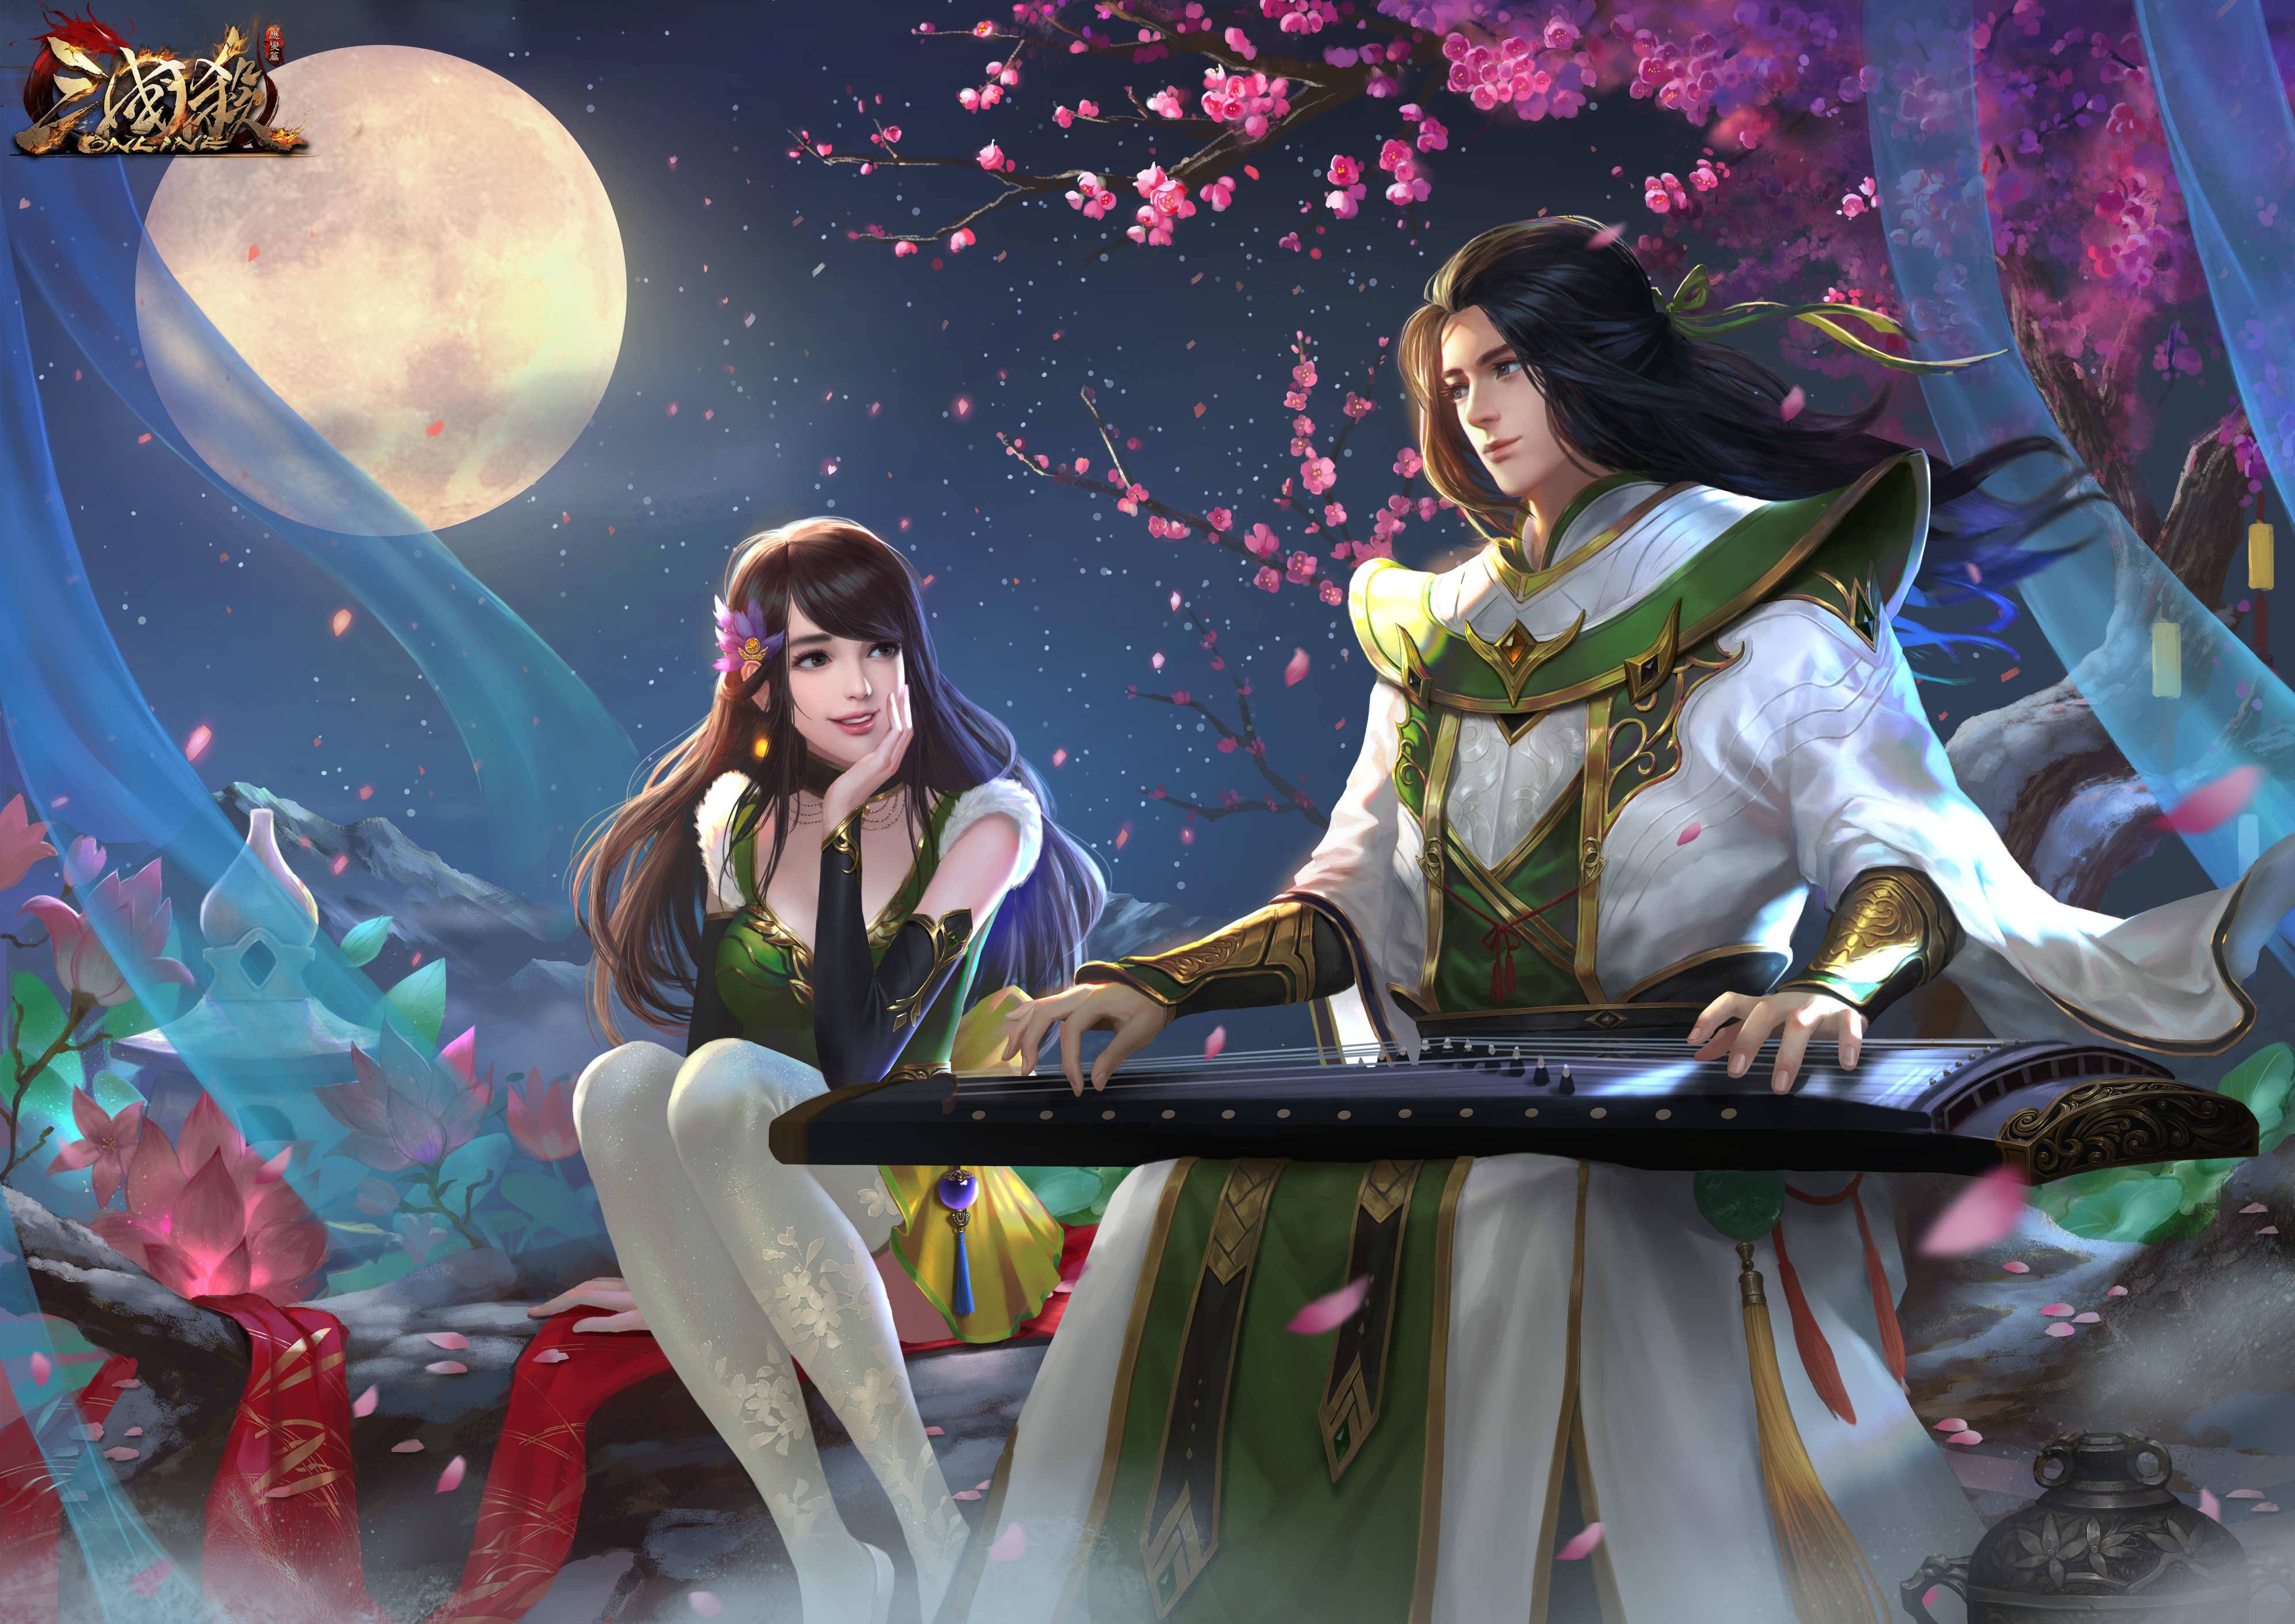 Three Kingdoms Video Game Characters Video Games Video Game Art Petals Flowers Video Game Girls Vide 3984x2820